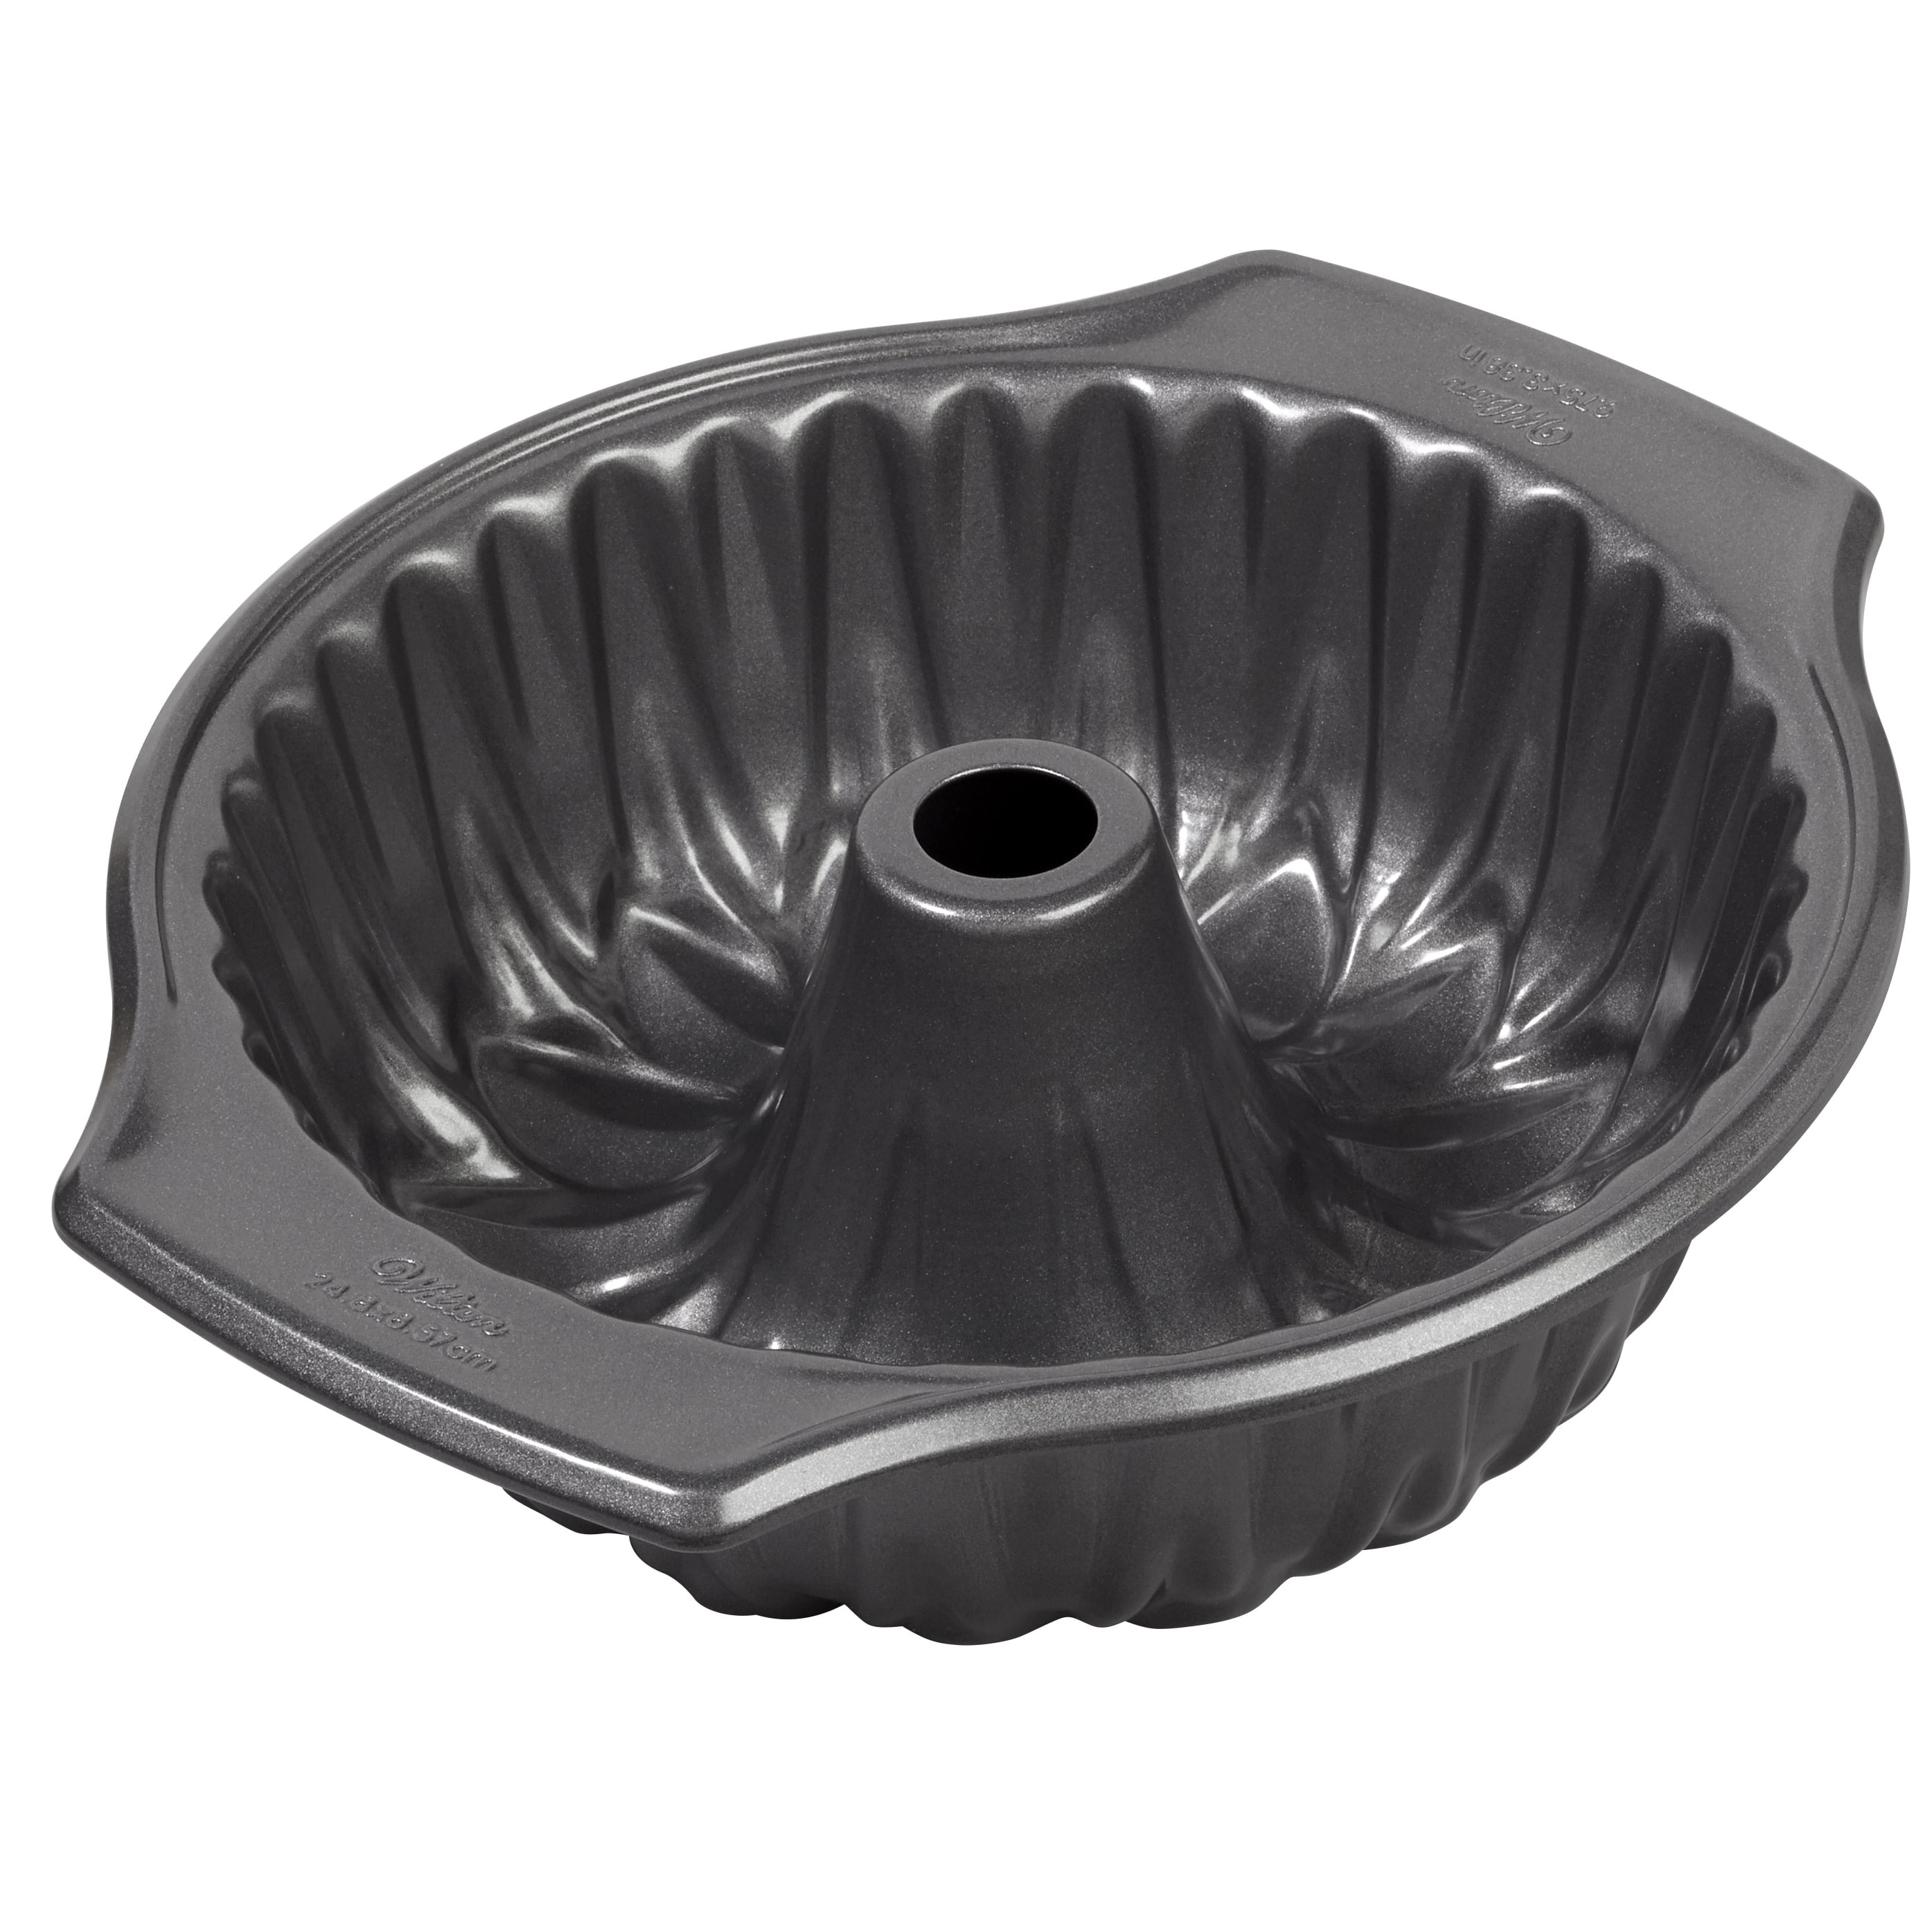 Instant Pot 5252033 Official Fluted Cake Pan 7-Inch Gray 